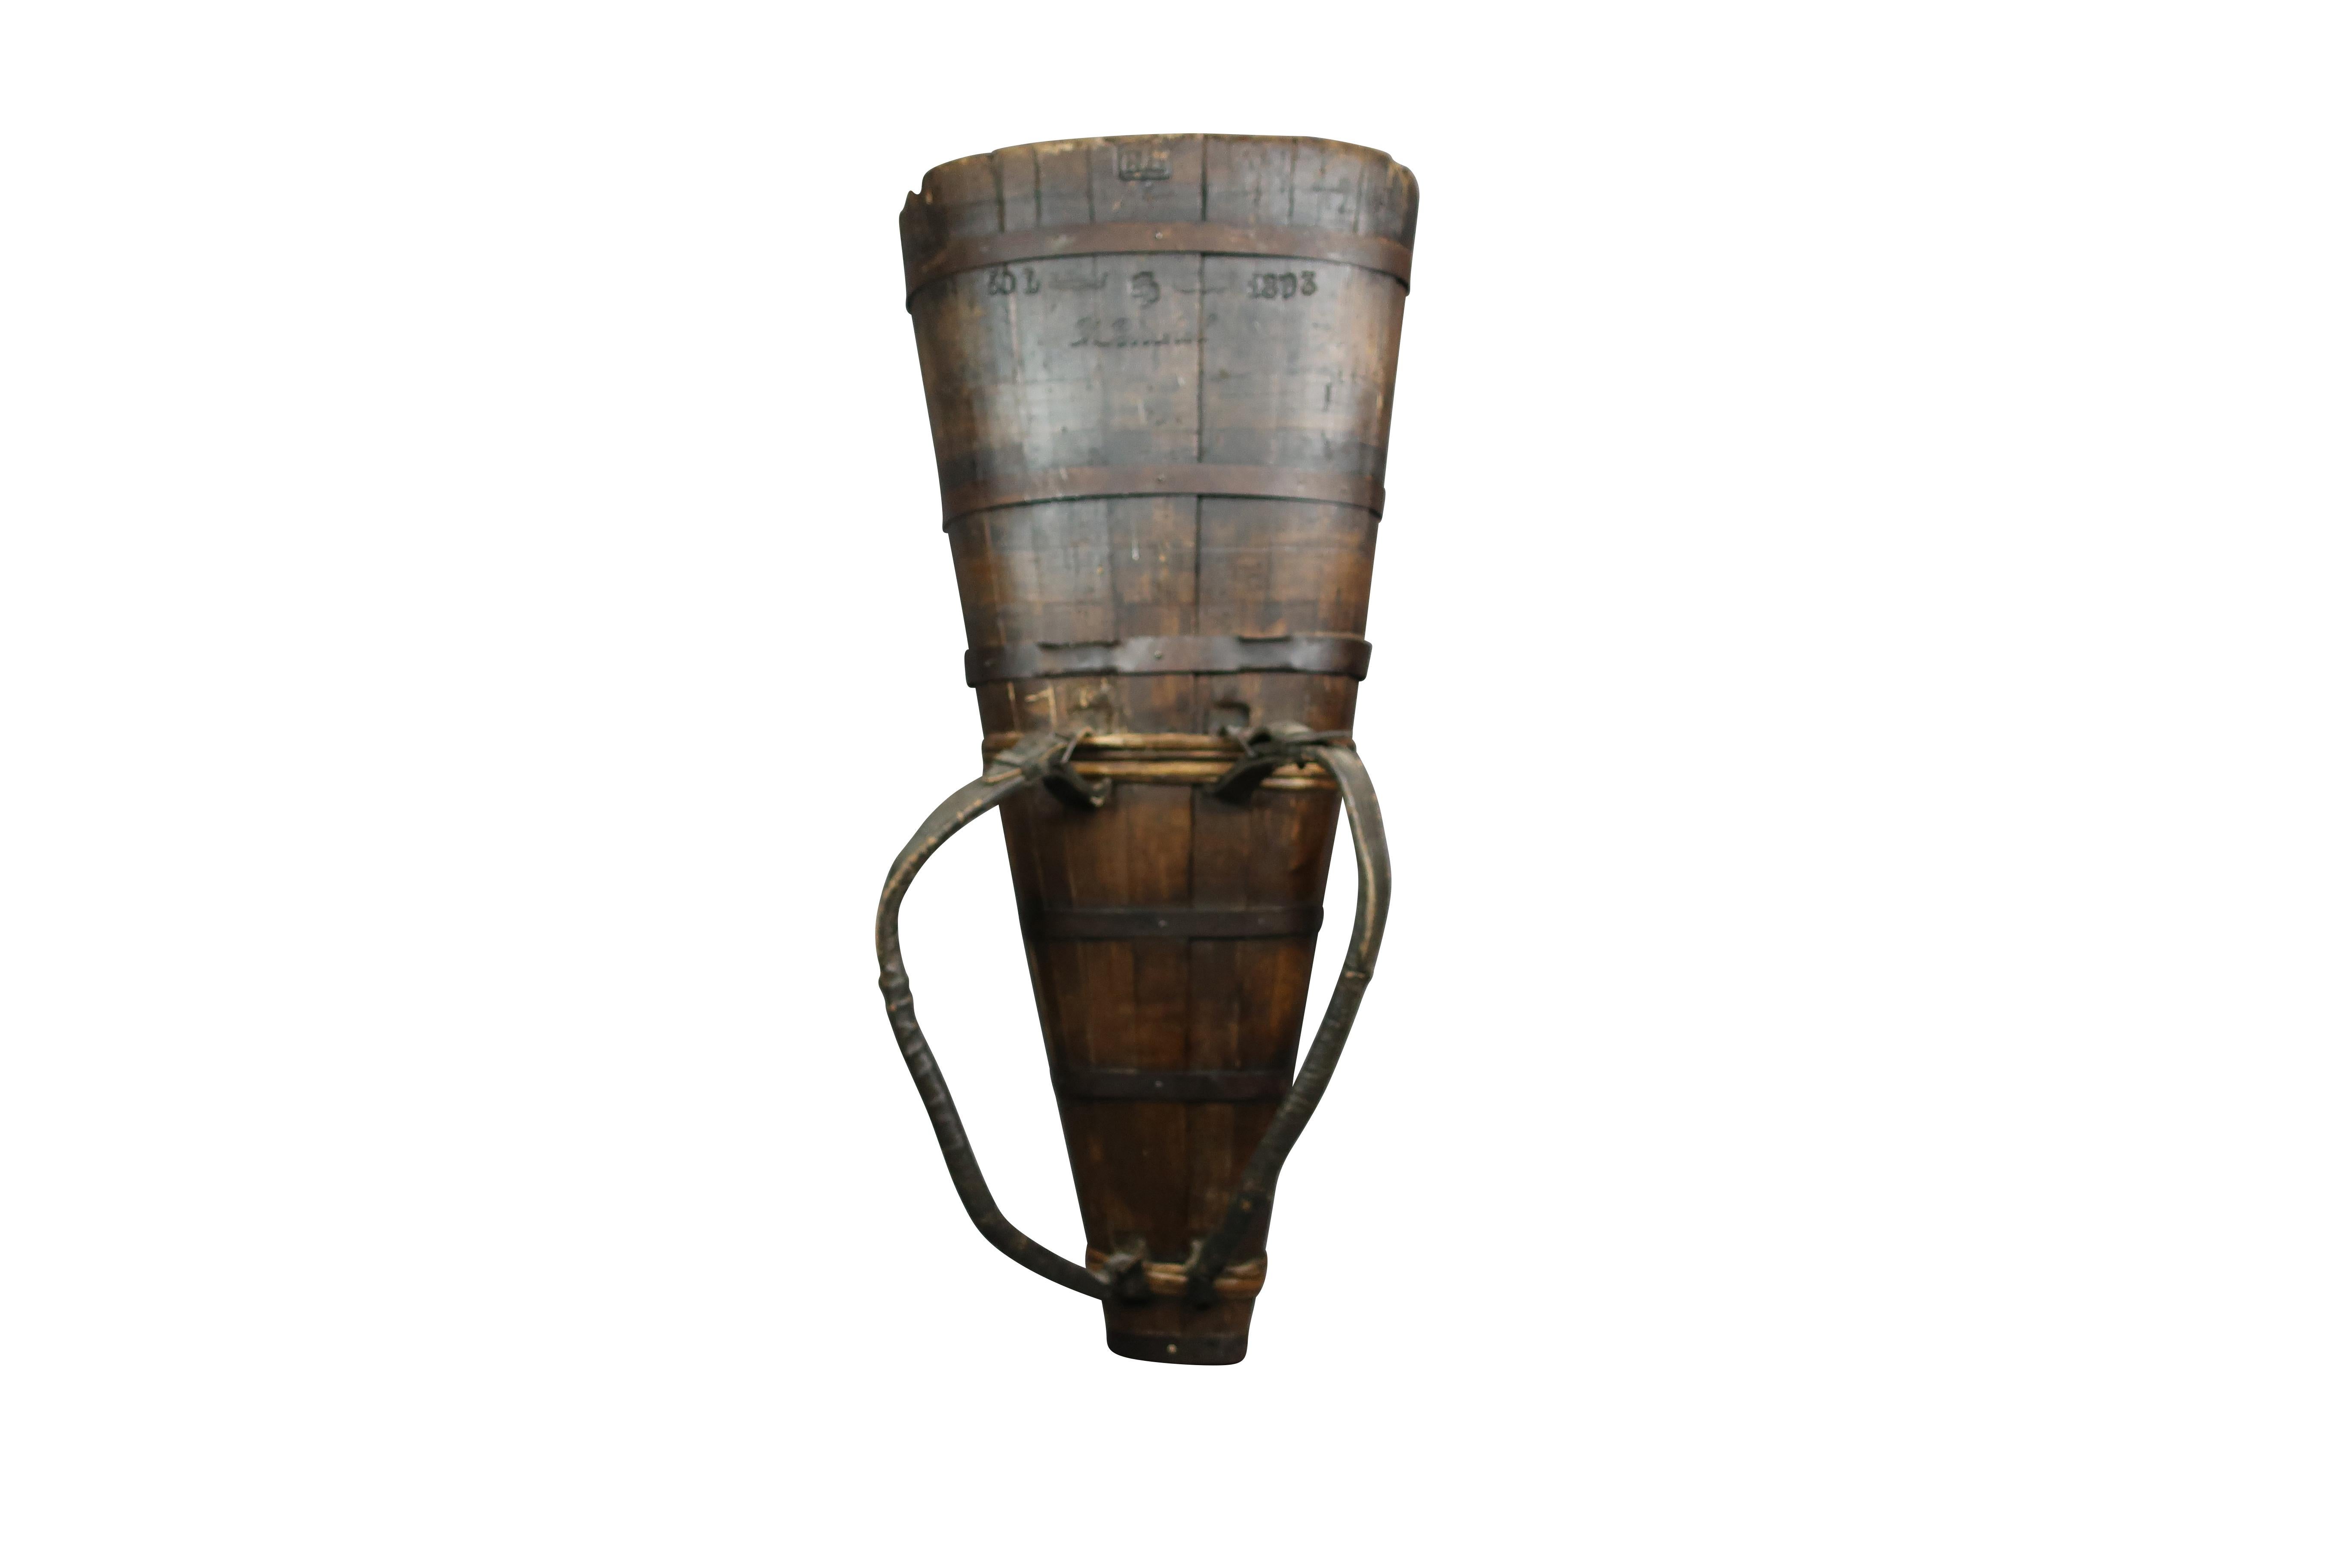 French wooden stave grape harvest basket/hotte, with iron strapping, and leather shoulder straps marked 1893 Chateau 